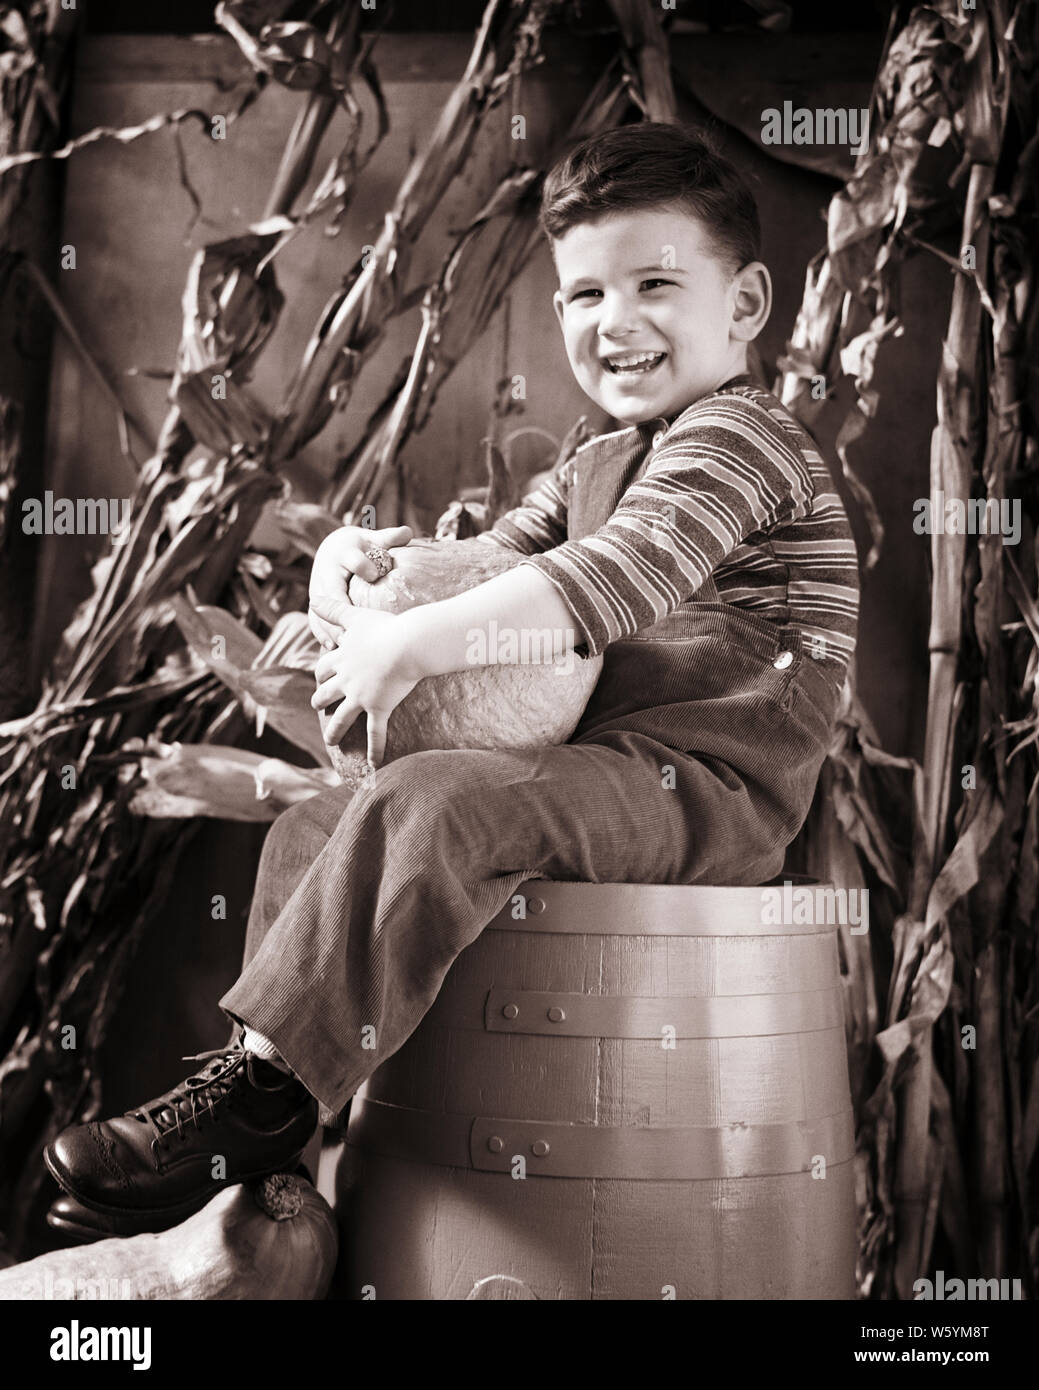 1940s SMILING HAPPY BOY SITTING ON BARREL HOLDING AUTUMN HARVEST PUMPKIN LOOKING AT CAMERA - c1722 HAR001 HARS BARREL EXPRESSIONS AGRICULTURE B&W EYE CONTACT HAPPINESS CHEERFUL EXCITEMENT ON SMILES CONCEPTUAL JOYFUL STYLISH GROWTH JUVENILES BLACK AND WHITE CAUCASIAN ETHNICITY HAR001 OLD FASHIONED Stock Photo